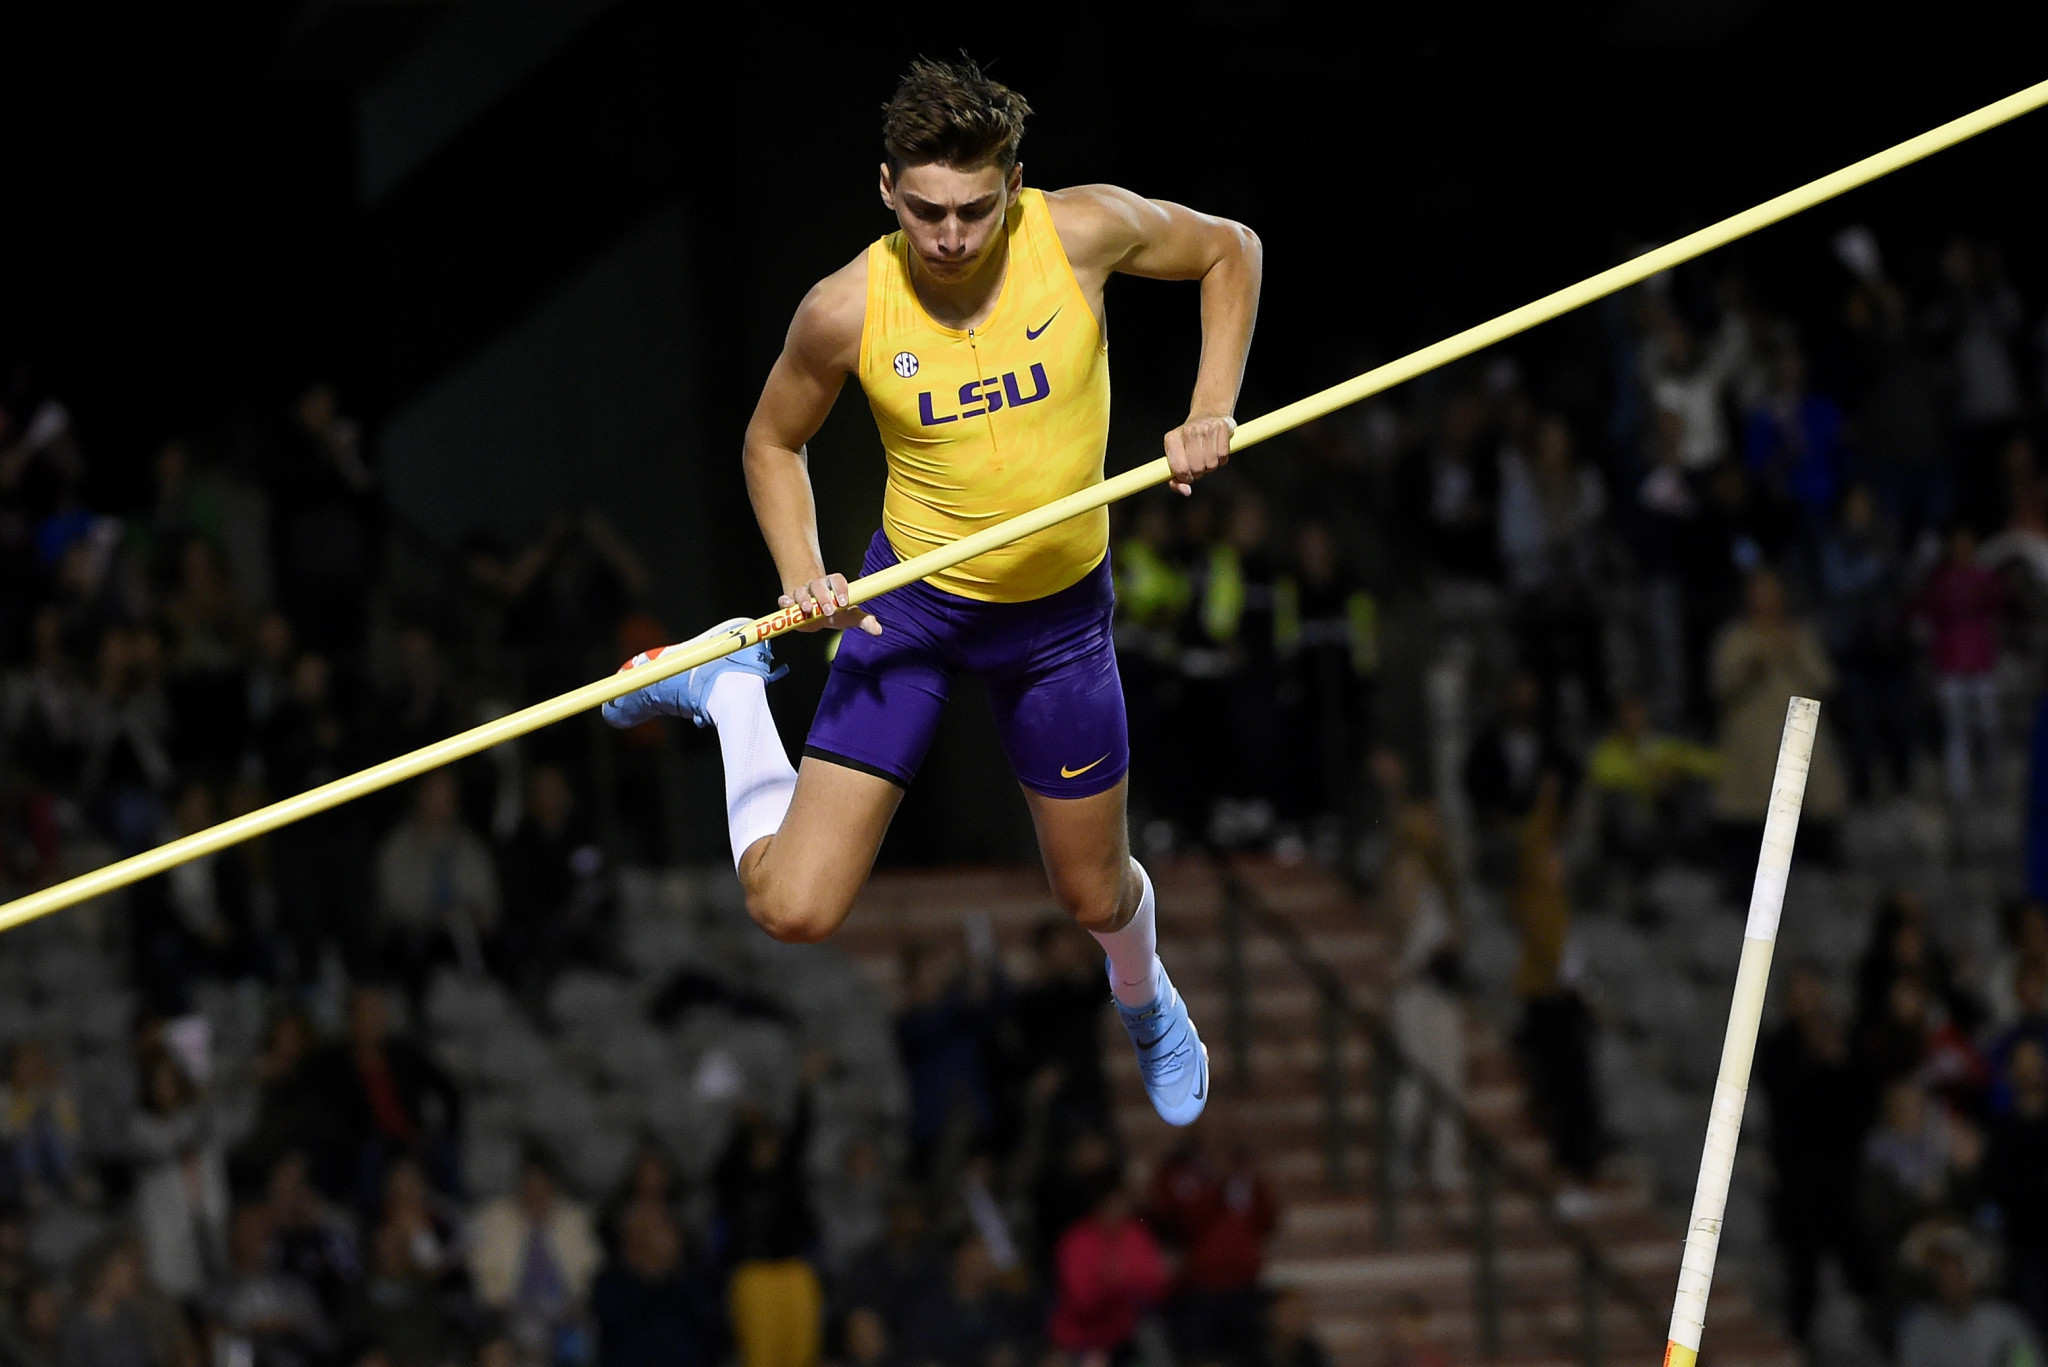 Sweden's European pole vault champion Armand Duplantis is among the five nominations for the IAAF Male Rising Star Award ©Getty Images  